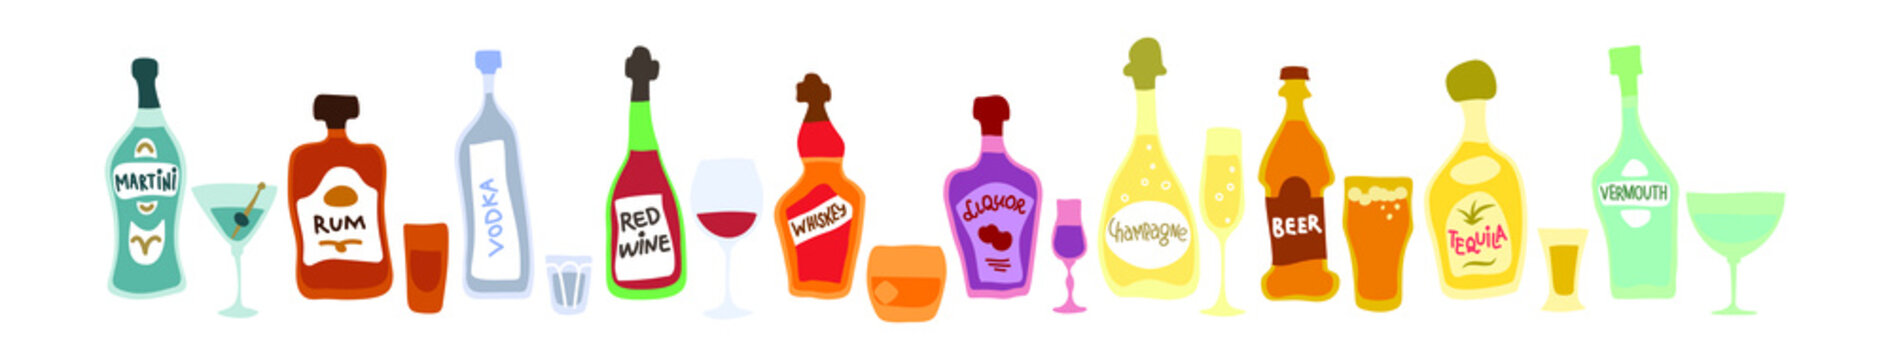 Collection bottle and glass in row. Freehand doodle style on white background. Colored cartoon sketch. Hand drawn image. Beer champagne red wine liquor vodka martini vermouth whiskey rum tequila.